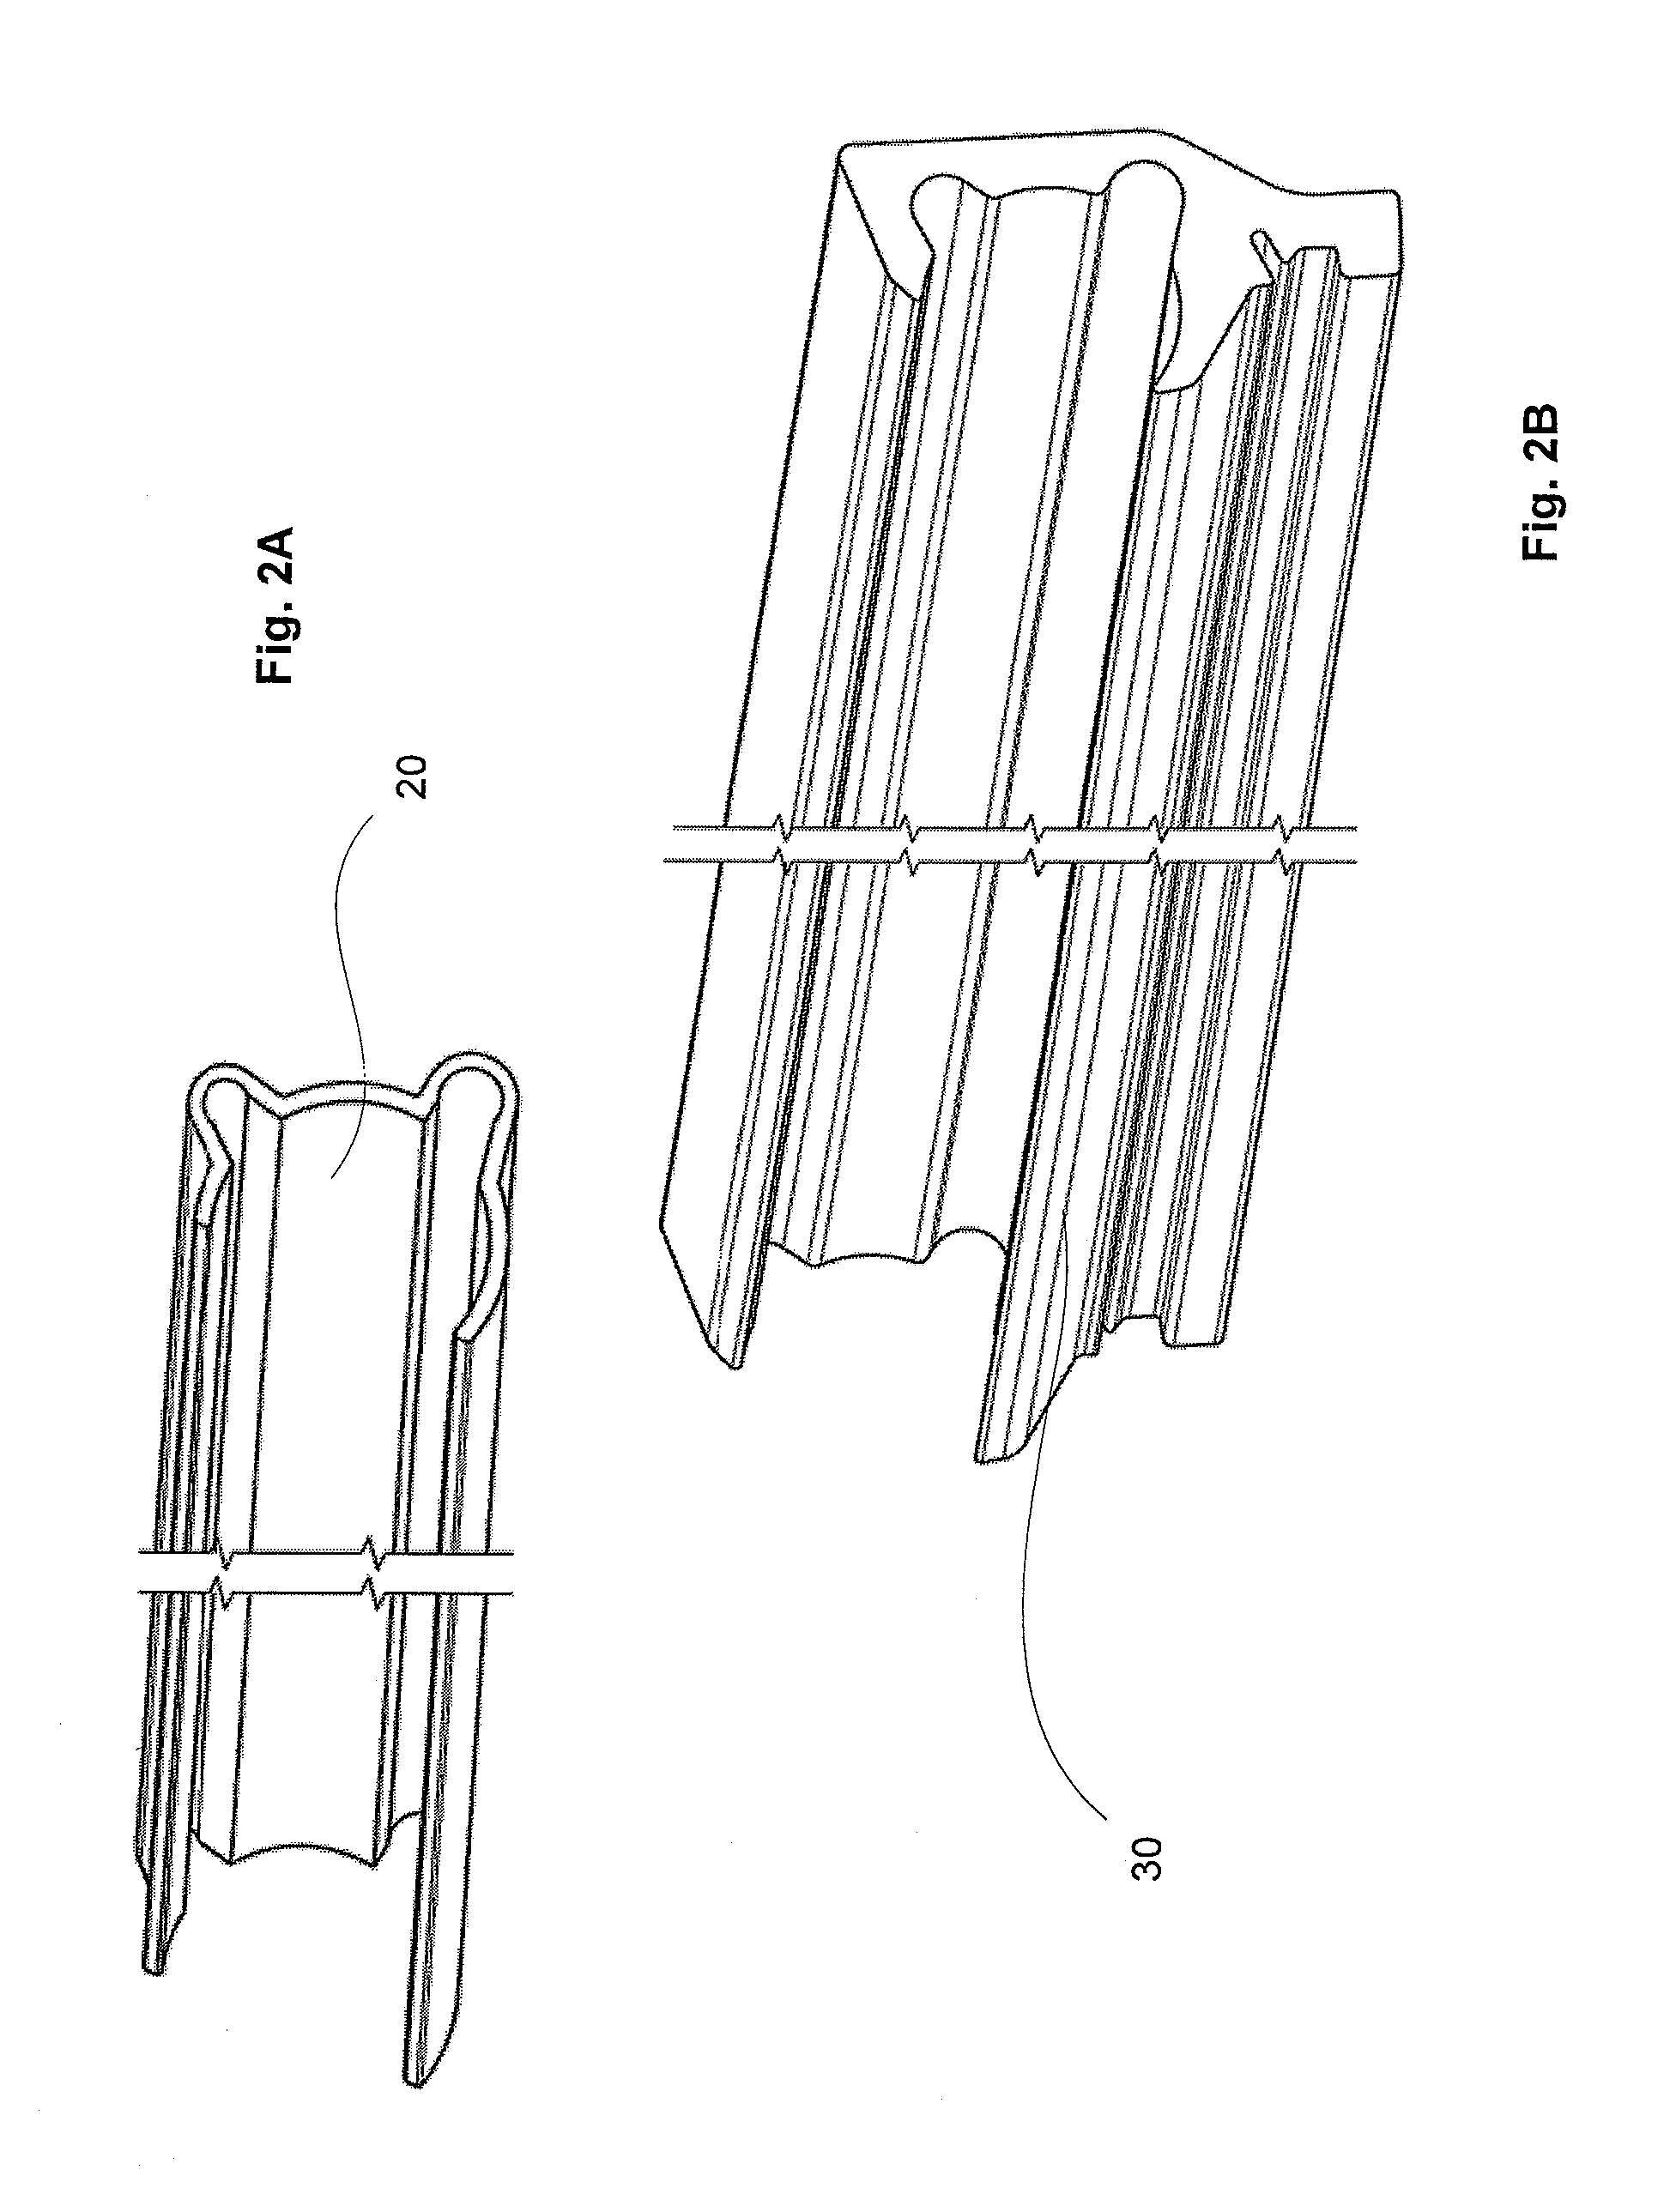 Rod-bed assembly